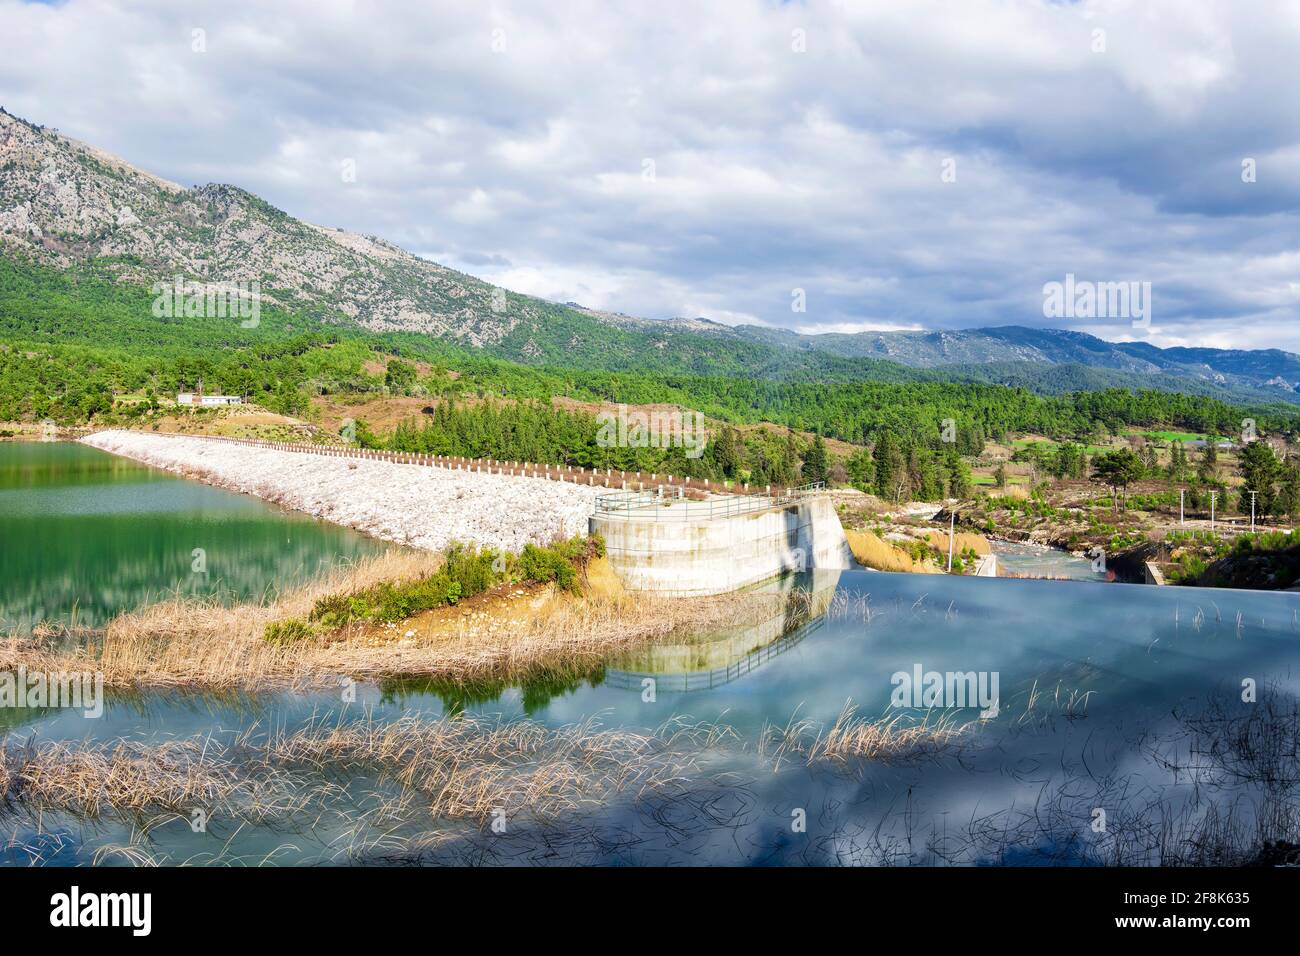 Picturesque dam on a river Stock Photo